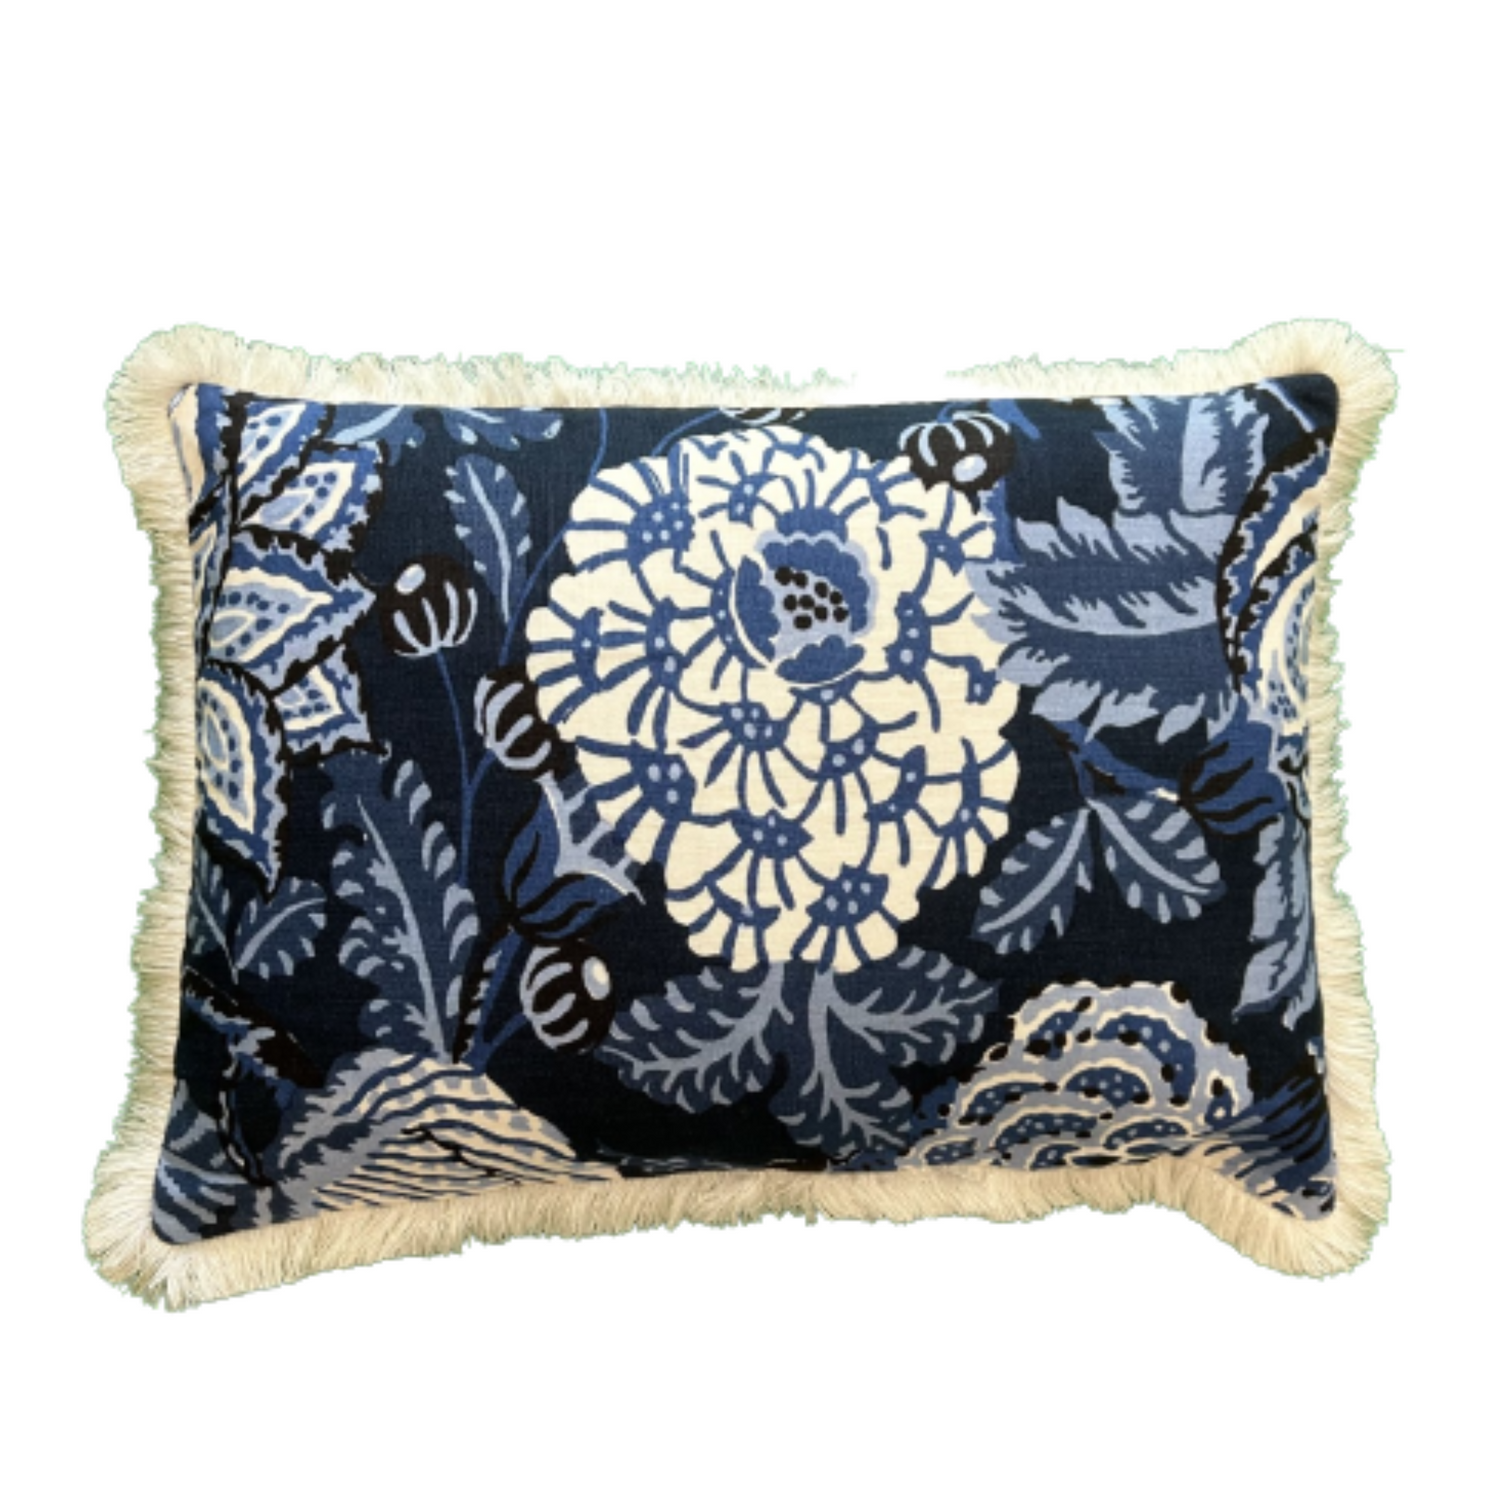 Mitford Blue and White 17 X 23 Rectangle Lumbar Designer Pillow with Down Feather Insert on Chair